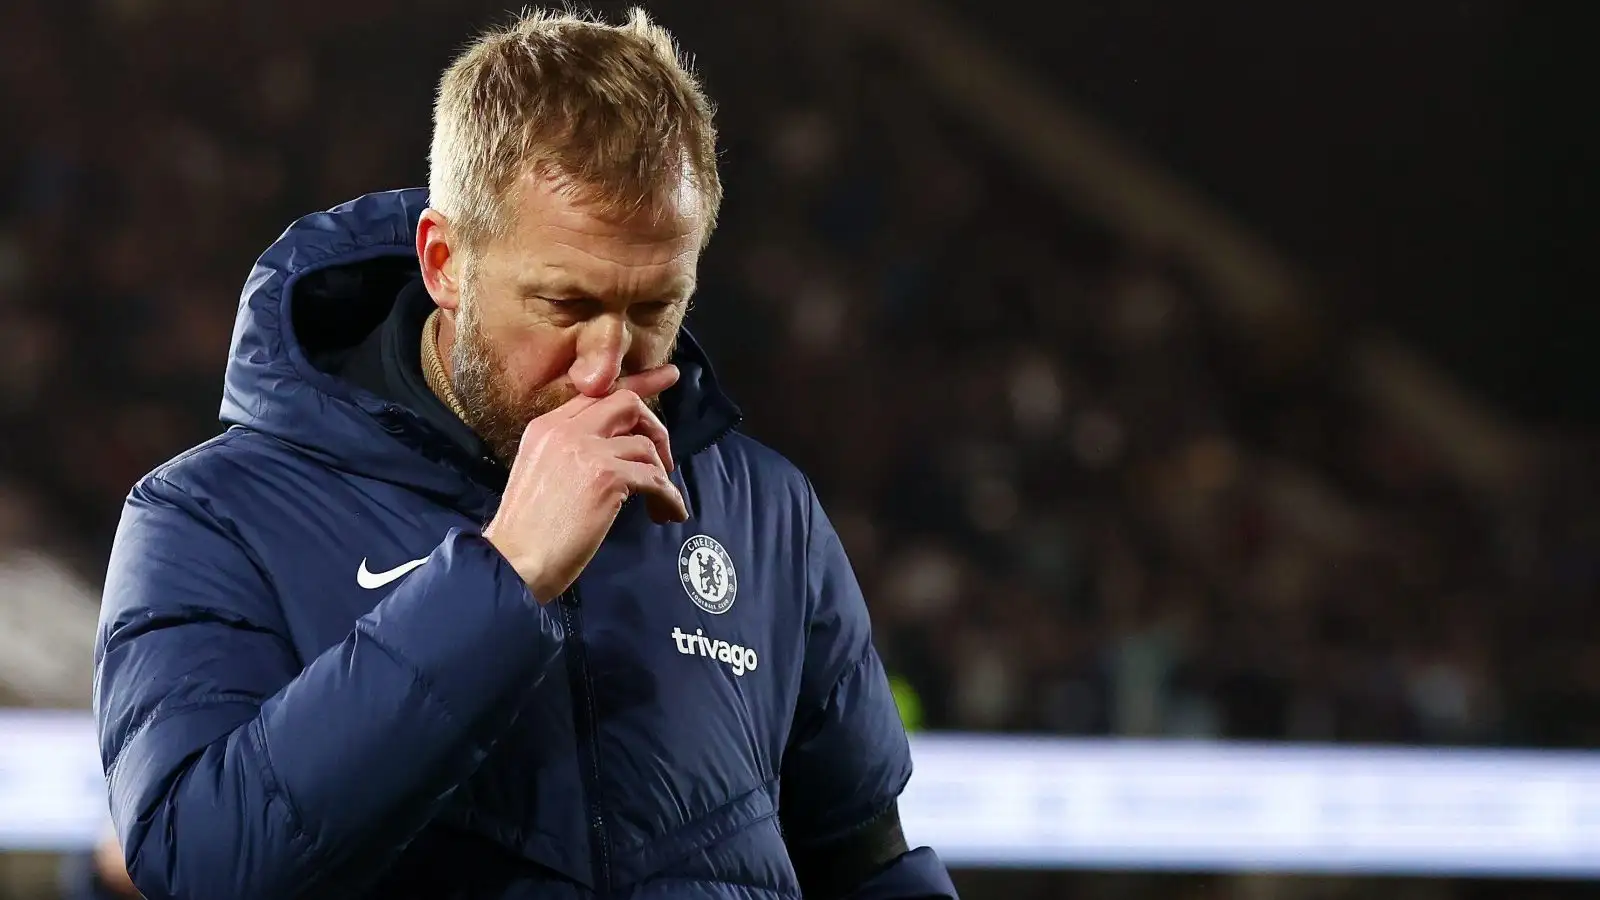 Ex-Chelsea head coach Graham Potter looks dejected during a match.